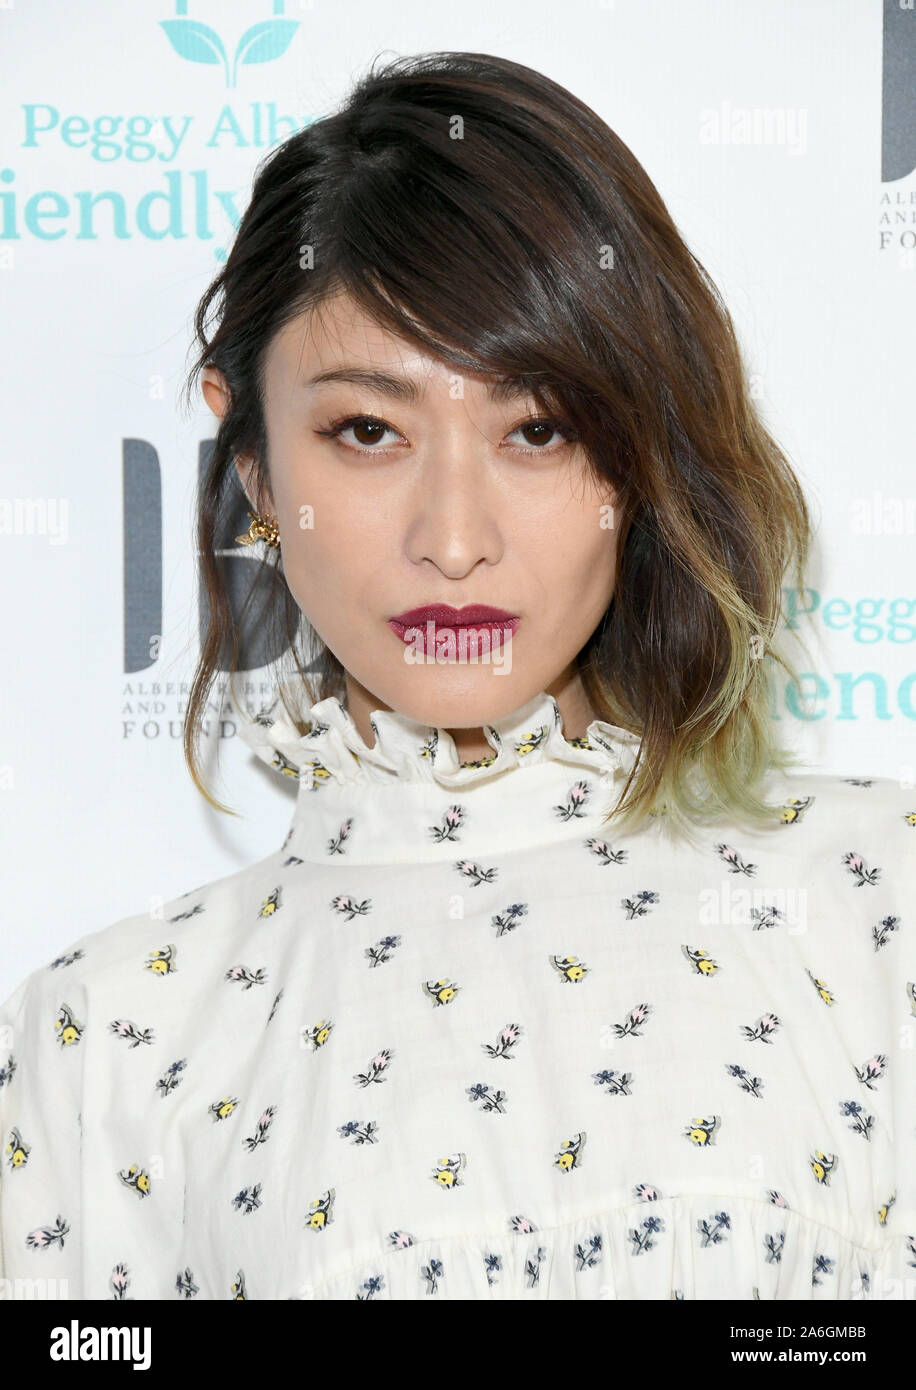 October 25, 2019, Beverly Hills, California, USA: 26 October 2019 -Beverly Hills, California - Yu Yamada. Friendly House 30th Annual Awards Luncheon held at the Beverly Hilton Hotel. Photo Credit: Birdie Thompson/AdMedia (Credit Image: © Birdie Thompson/AdMedia via ZUMA Wire) Stock Photo